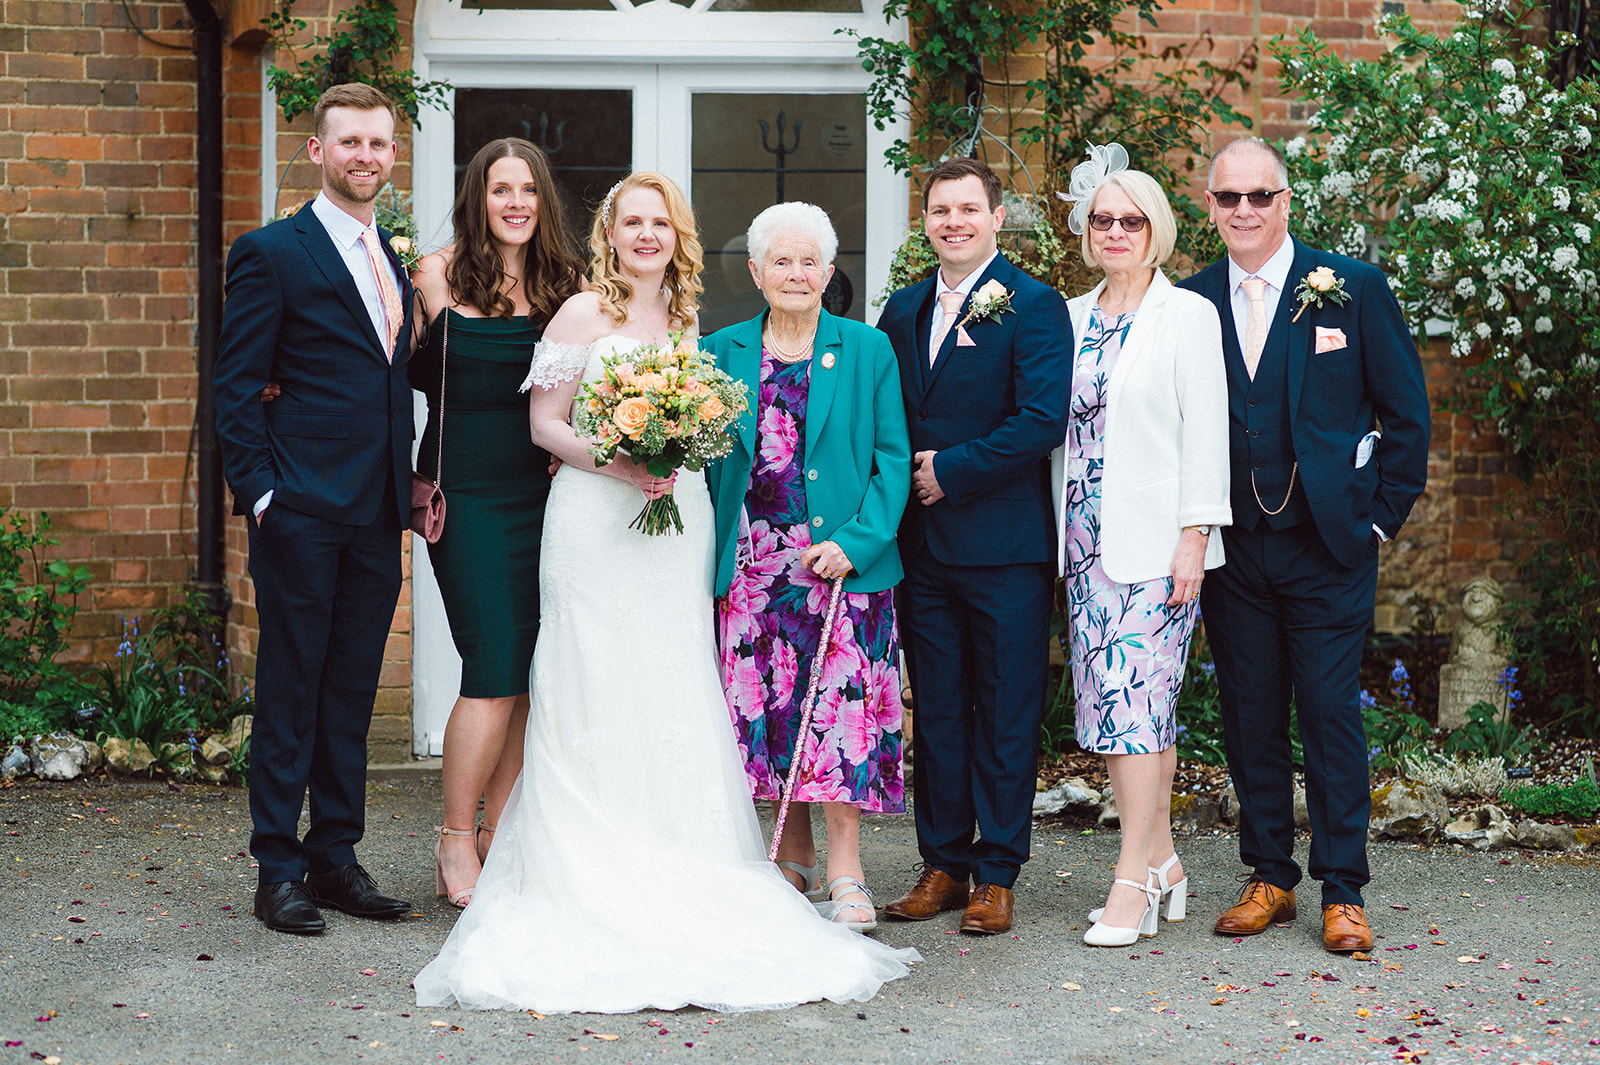 Joyous celebration and laughter as family and friends gather at Lewis and Sarah's wedding at The Old Rectory, Berkshire